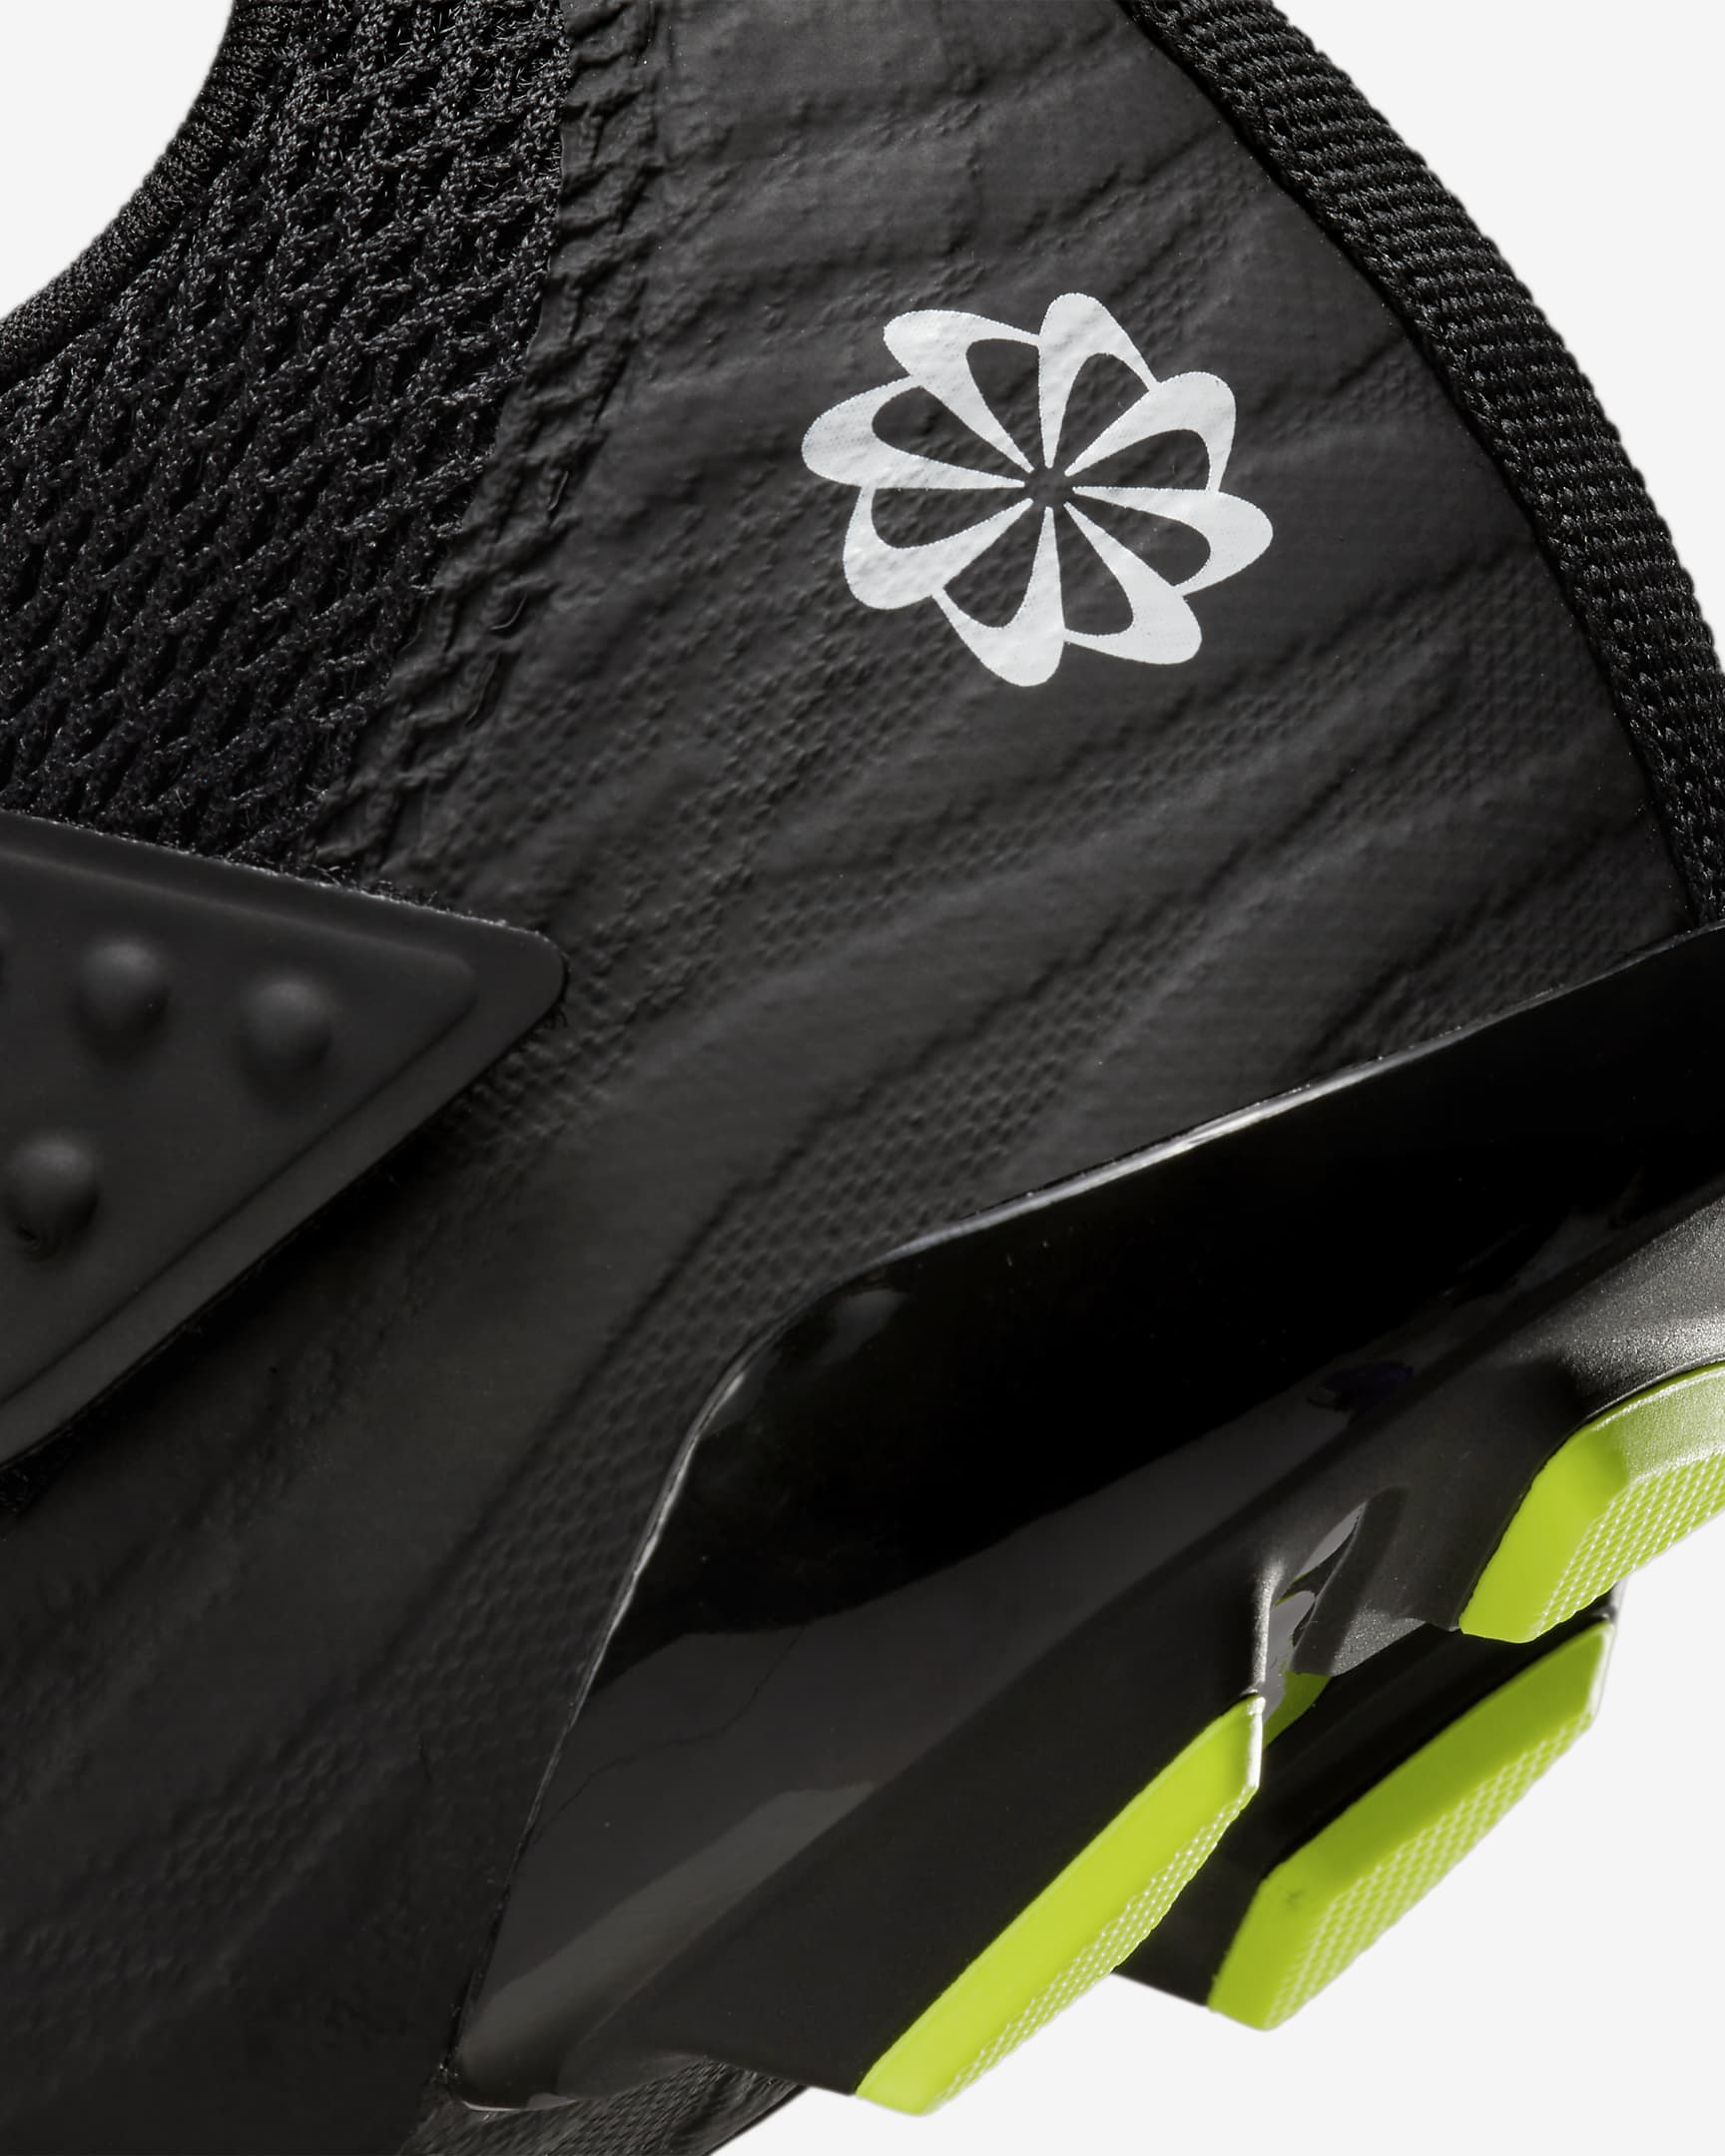 Nike SuperRep Cycle 2 Next Nature Indoor Cycling Shoes - Black/Anthracite/Volt/White